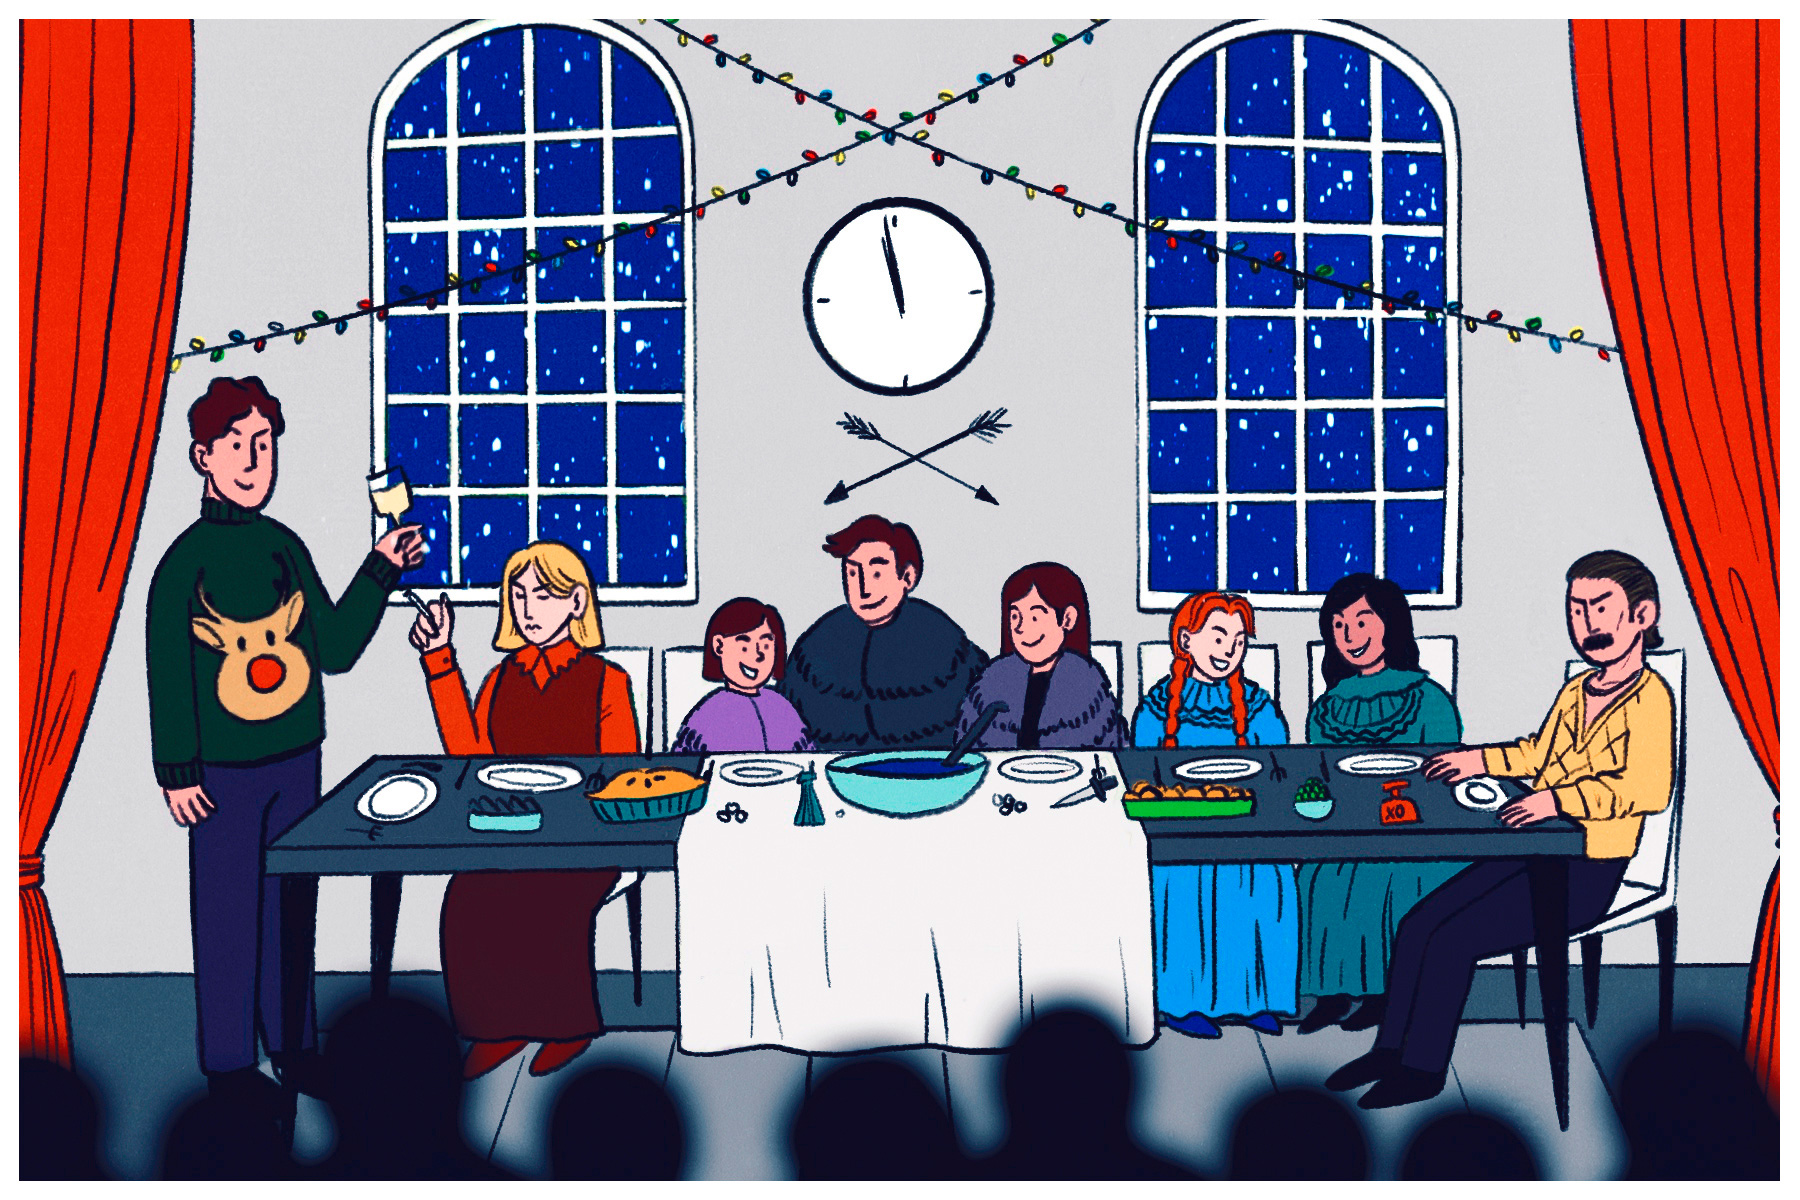 An illustration of literary characters sharing a table